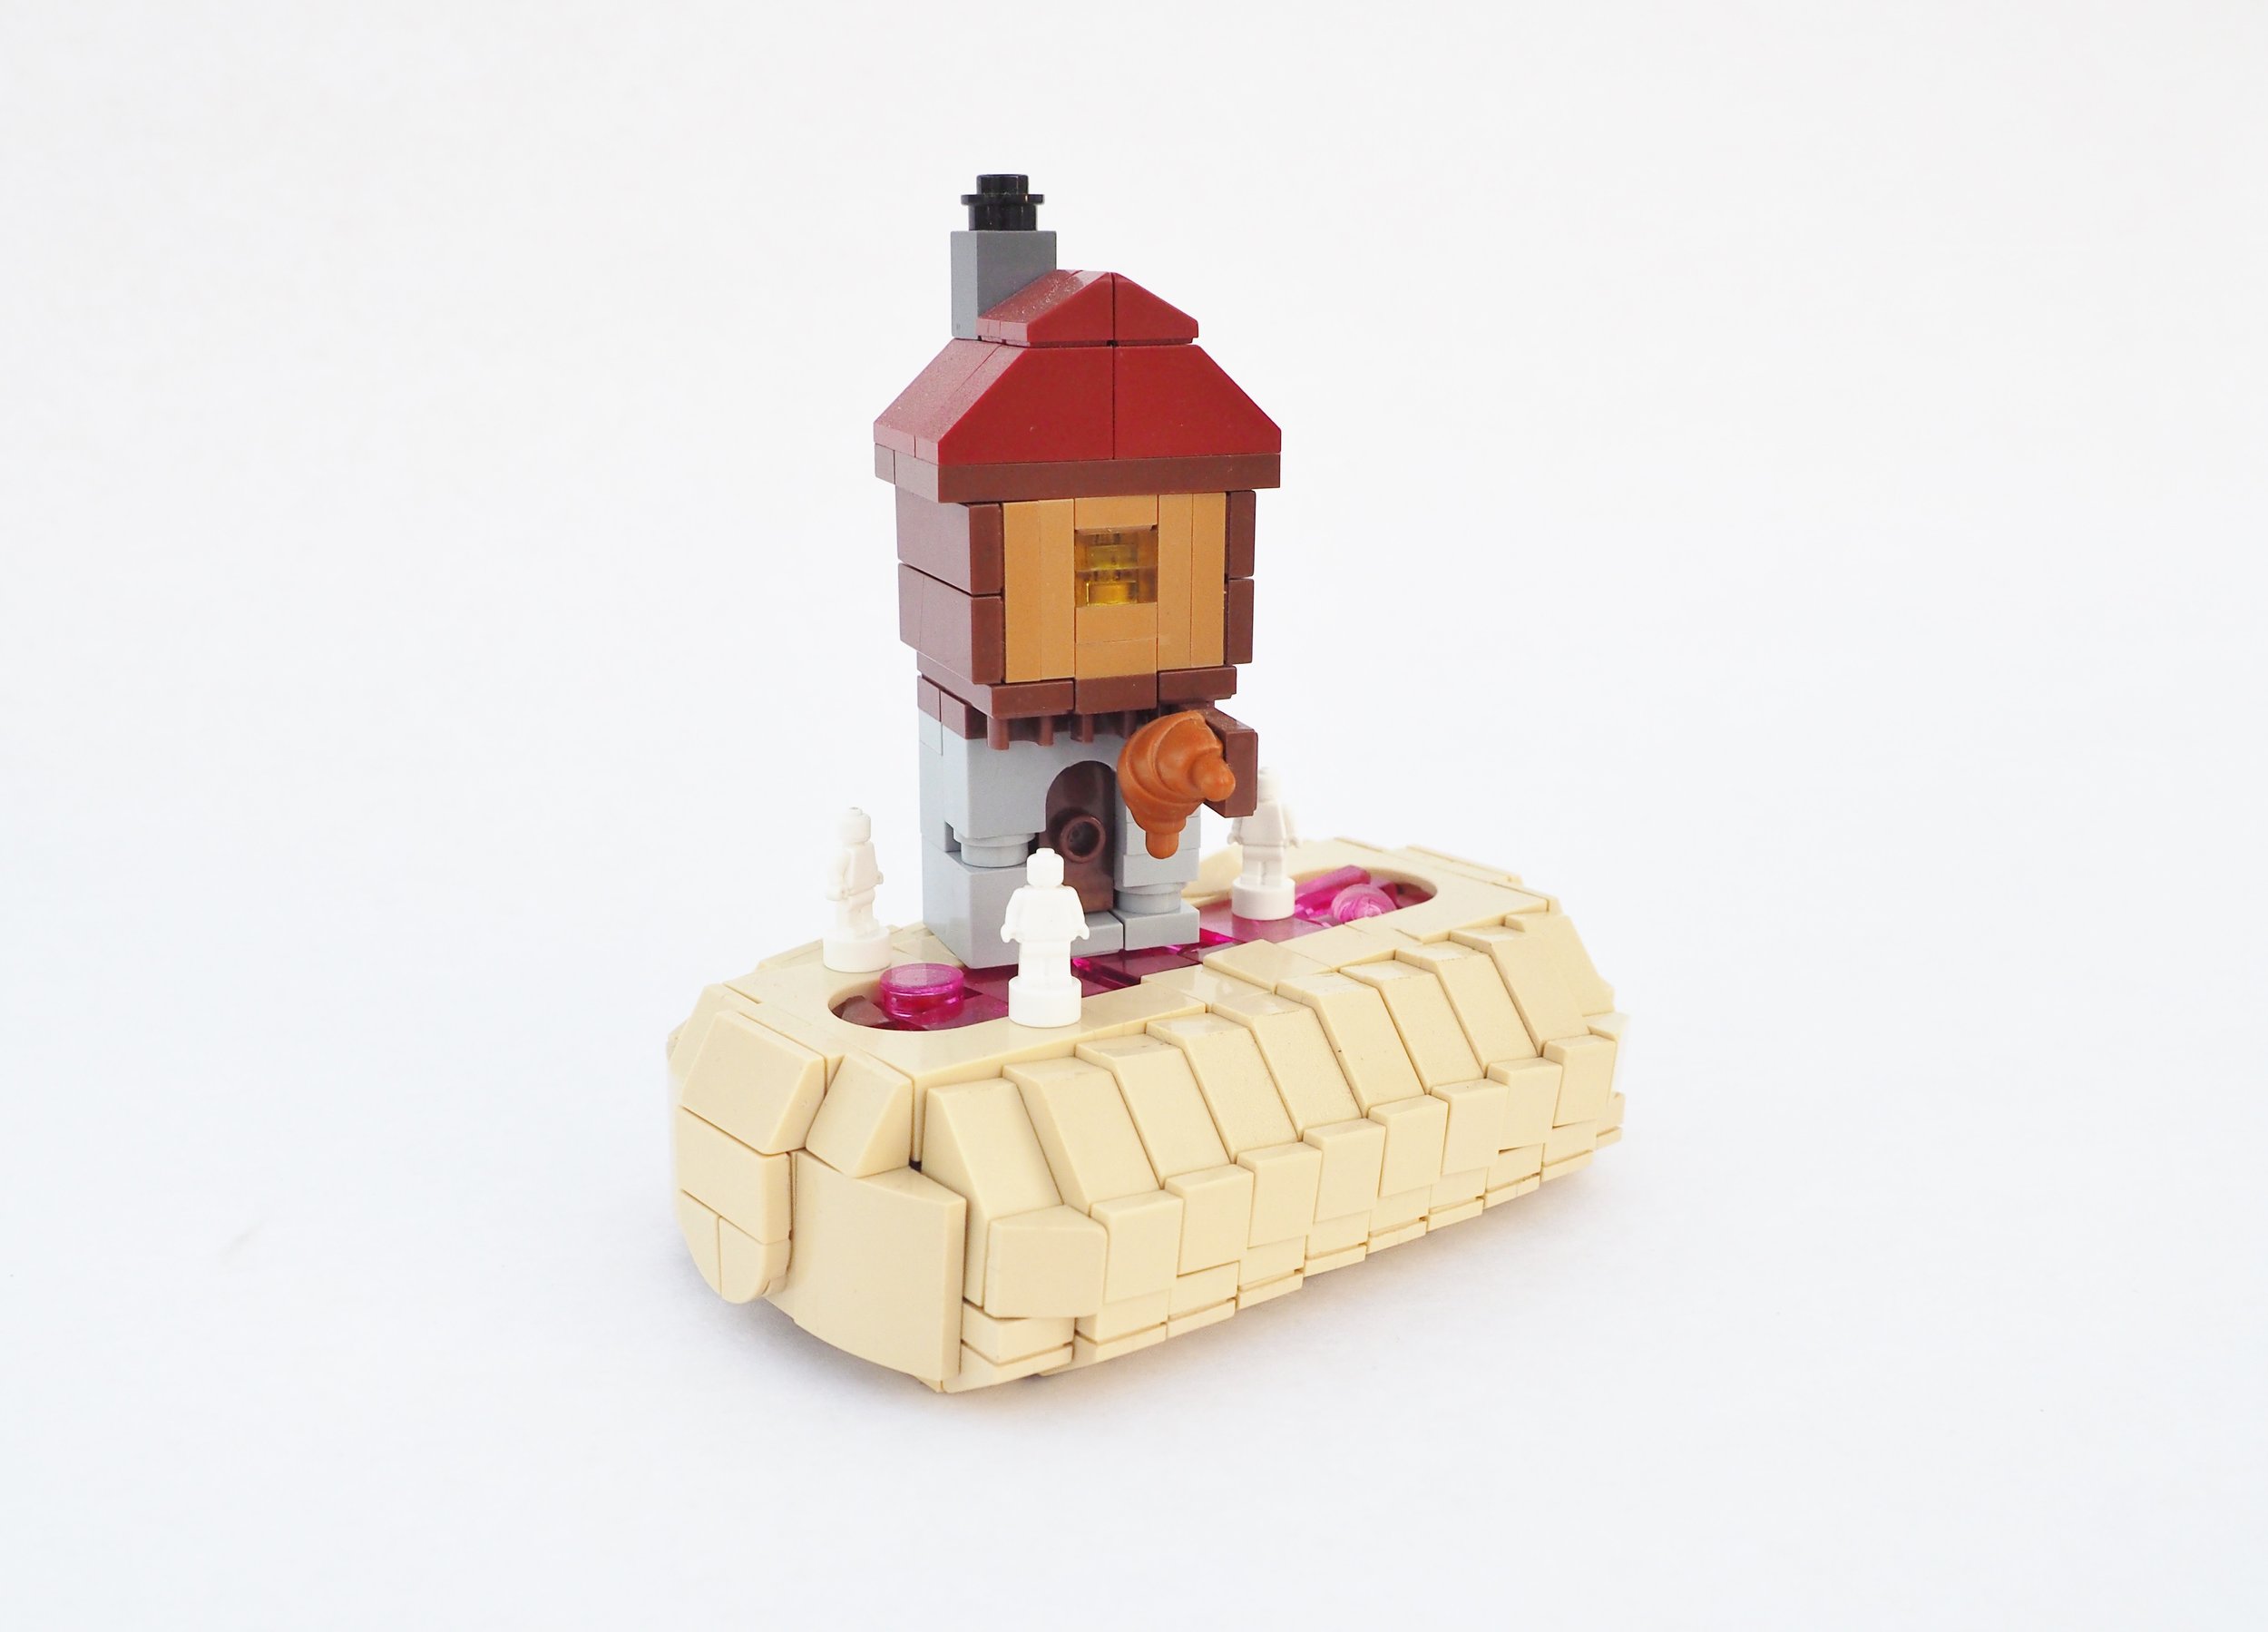  also nothing to see here, just a micro house on a giant pastry, move along 